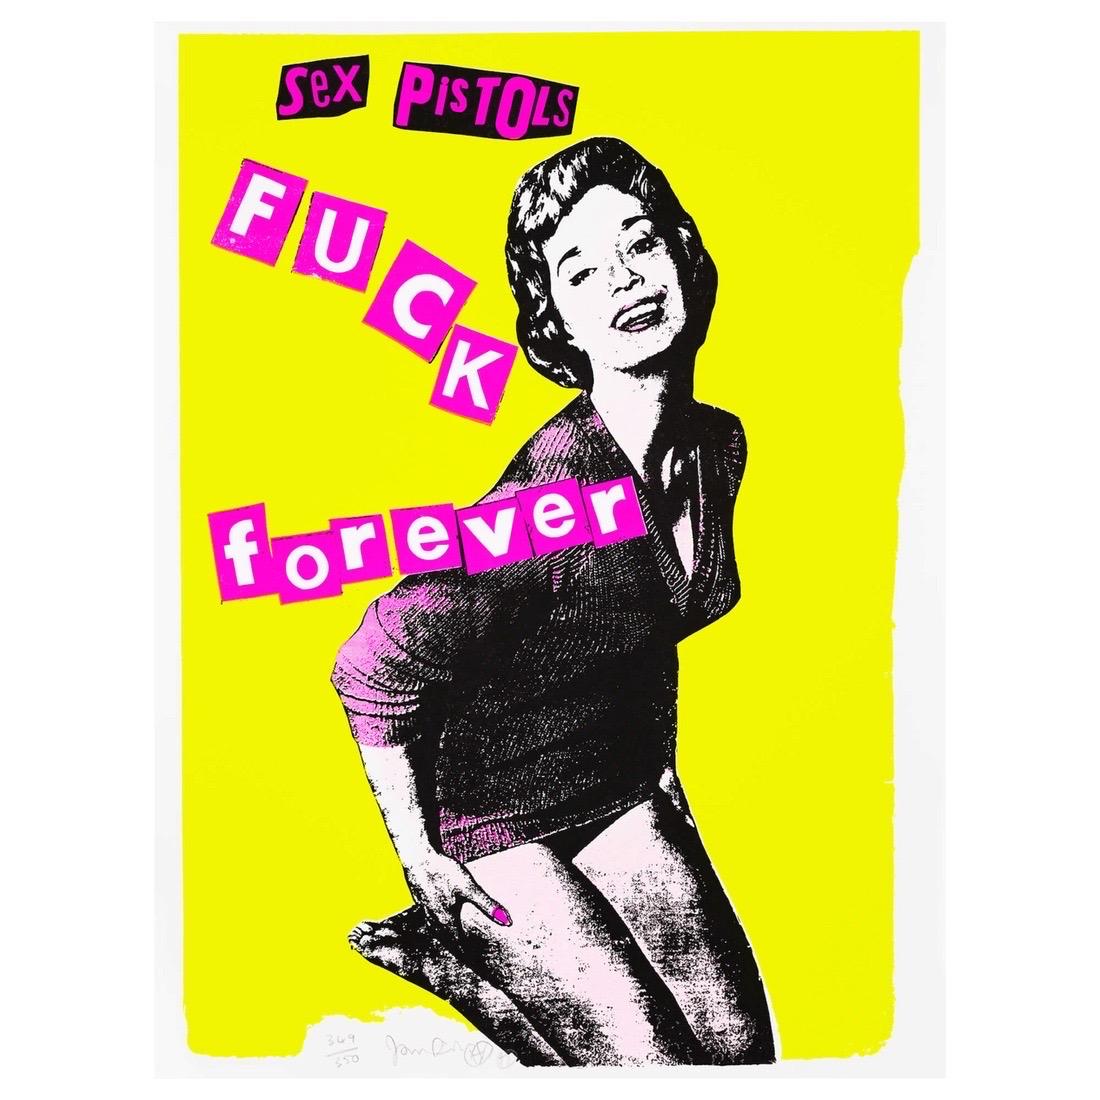 Jamie Reid, Fuck Forever Screen Print (Yellow) 1997

Screen print on paper 

Edition of 350

75 x 101 cm  29.52 x 39.76 in 

Hand-signed and numbered by the artist

Original with blind stamp and official Polygram Sex Pistols license stamp.

This